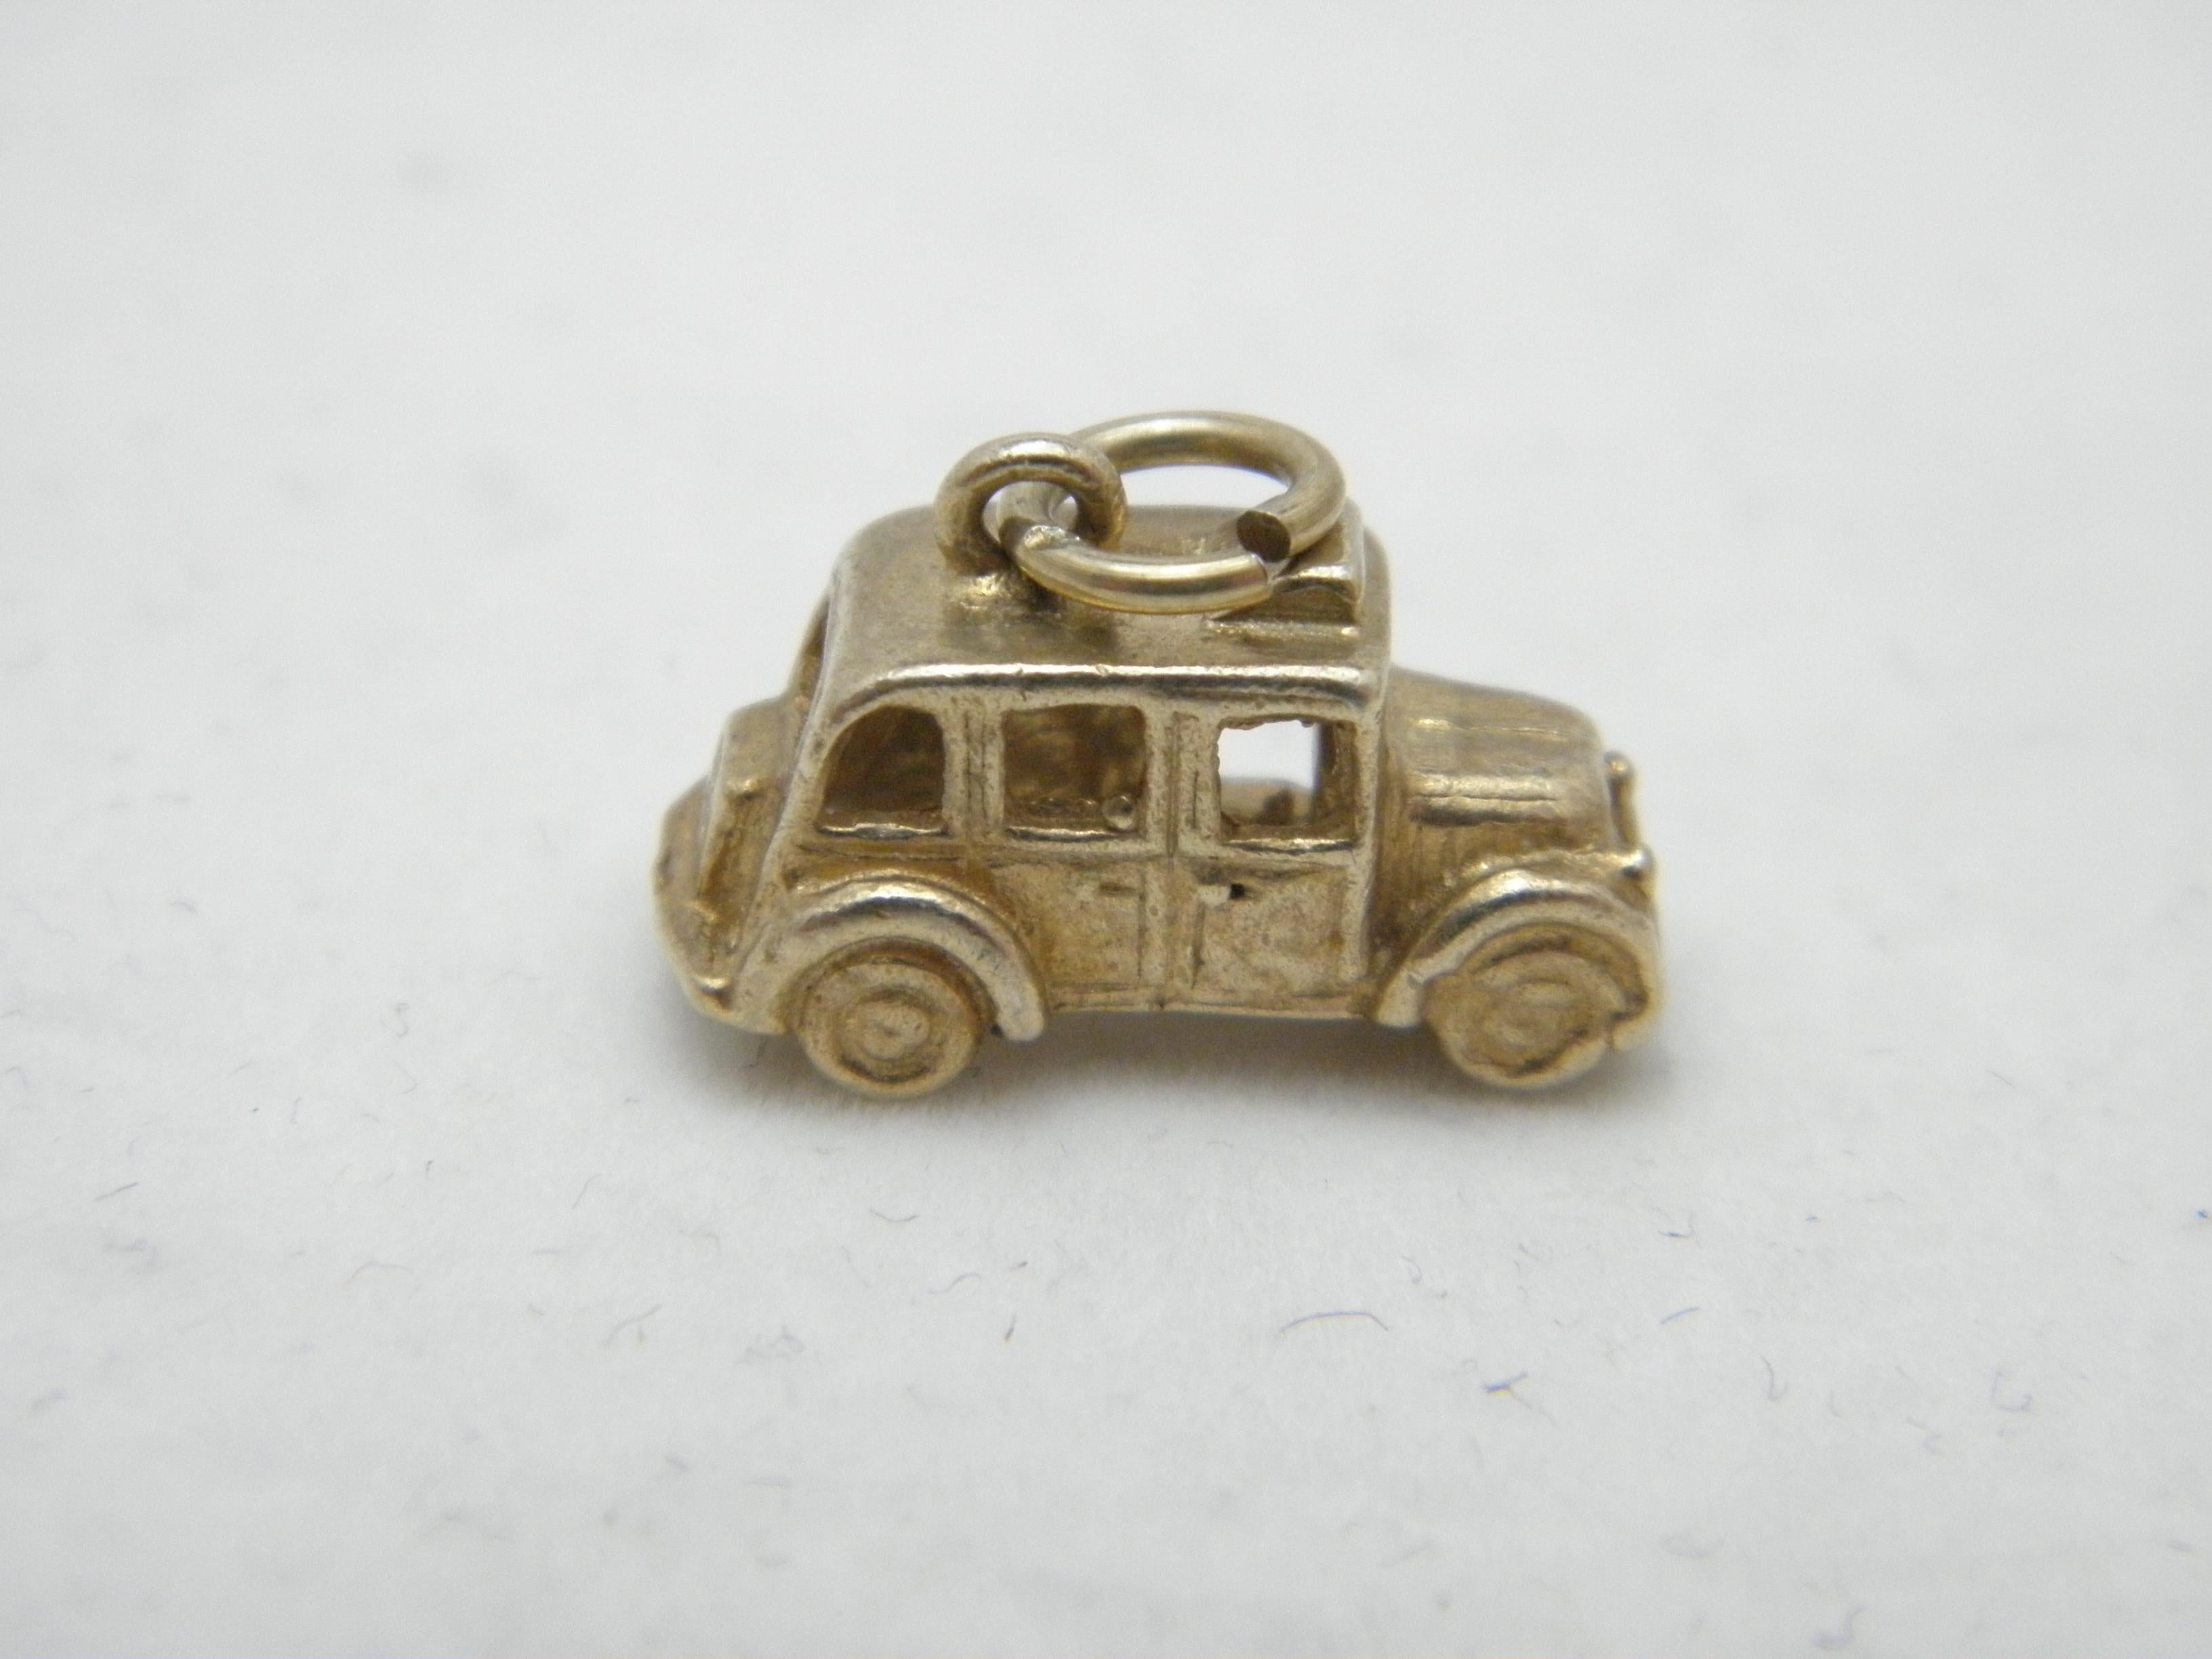 If you have landed on this page then you have an eye for beauty.

On offer is this gorgeous

9CT VINTAGE GOLD LARGE LONDON HACVKNEY TAXI CAB CHARM FOB / PENDANT

DETAILS
Material: 9ct (375/000) Solid Yellow Gold - thick and lovely detailed